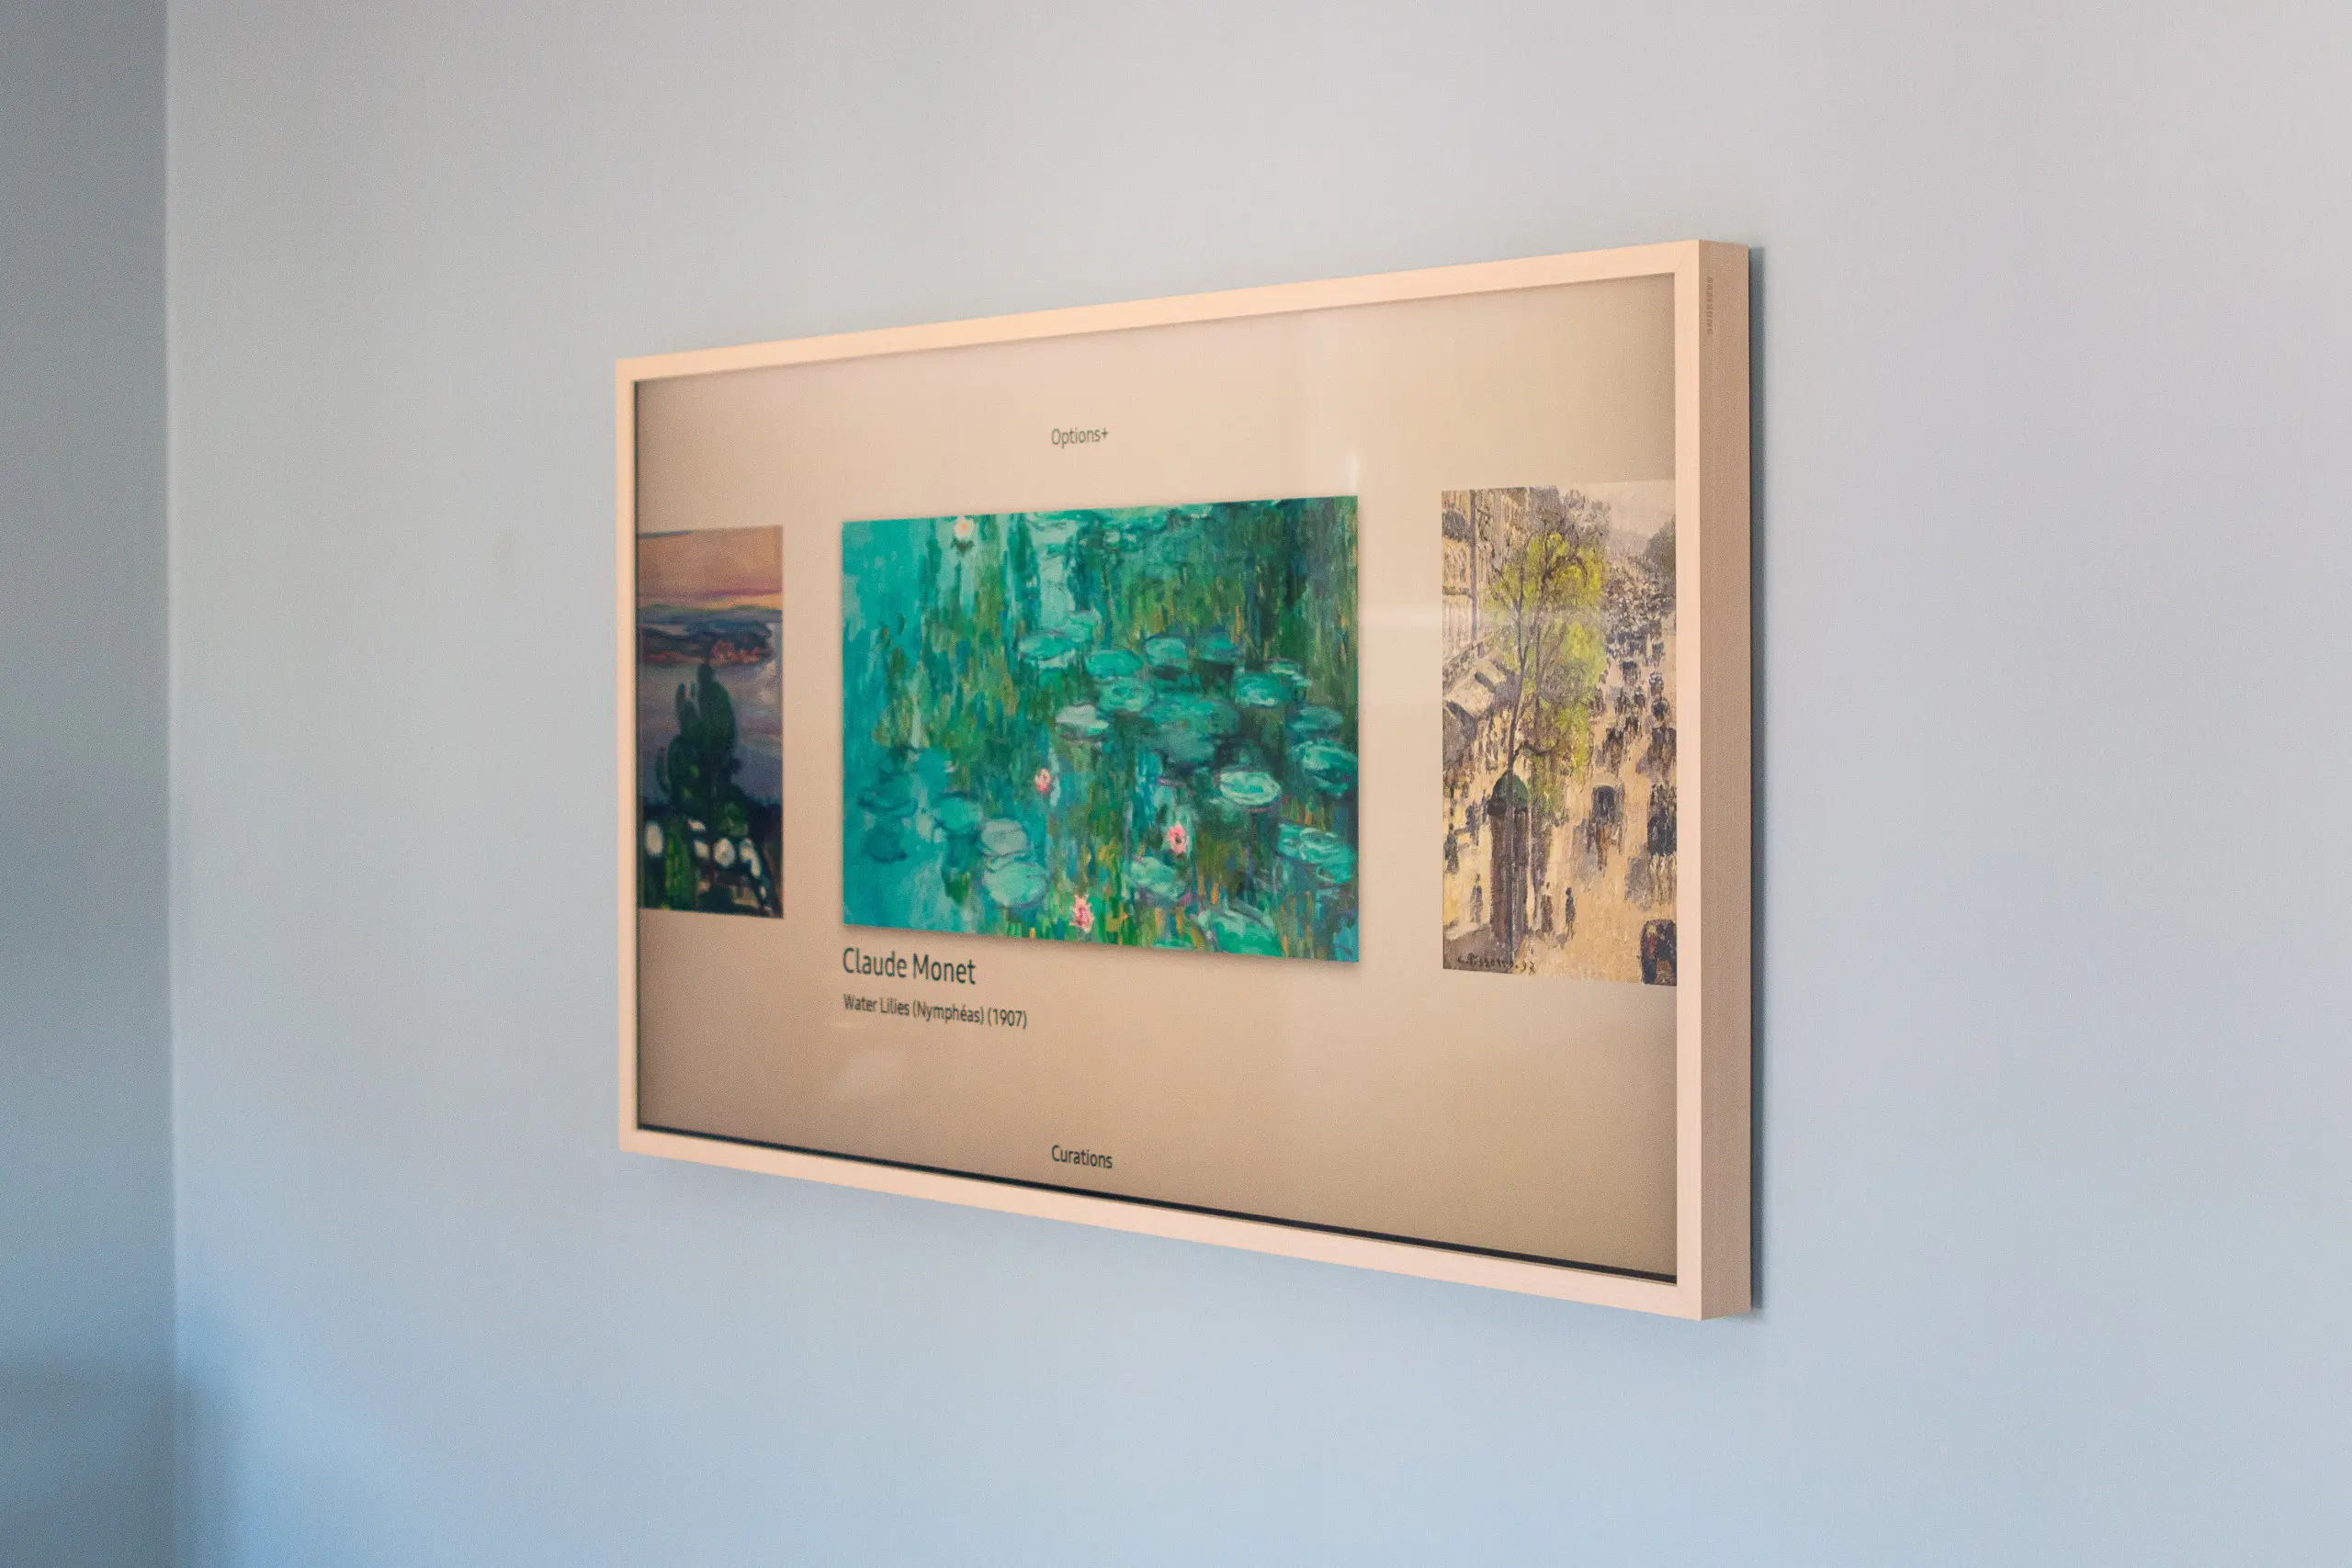 Finding art to display on the Frame TV